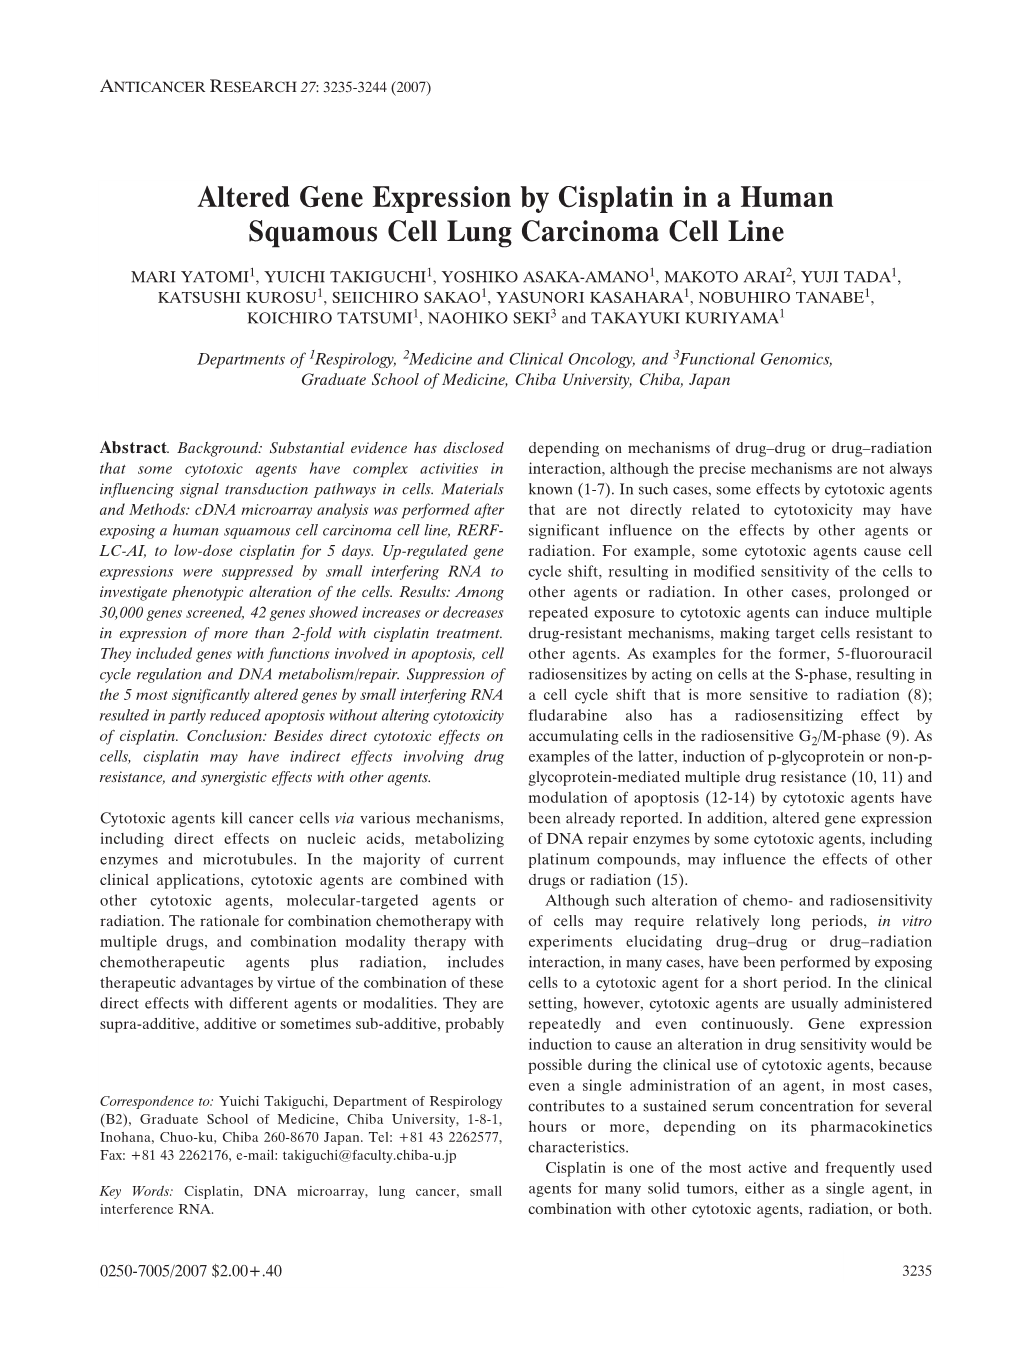 Altered Gene Expression by Cisplatin in a Human Squamous Cell Lung Carcinoma Cell Line